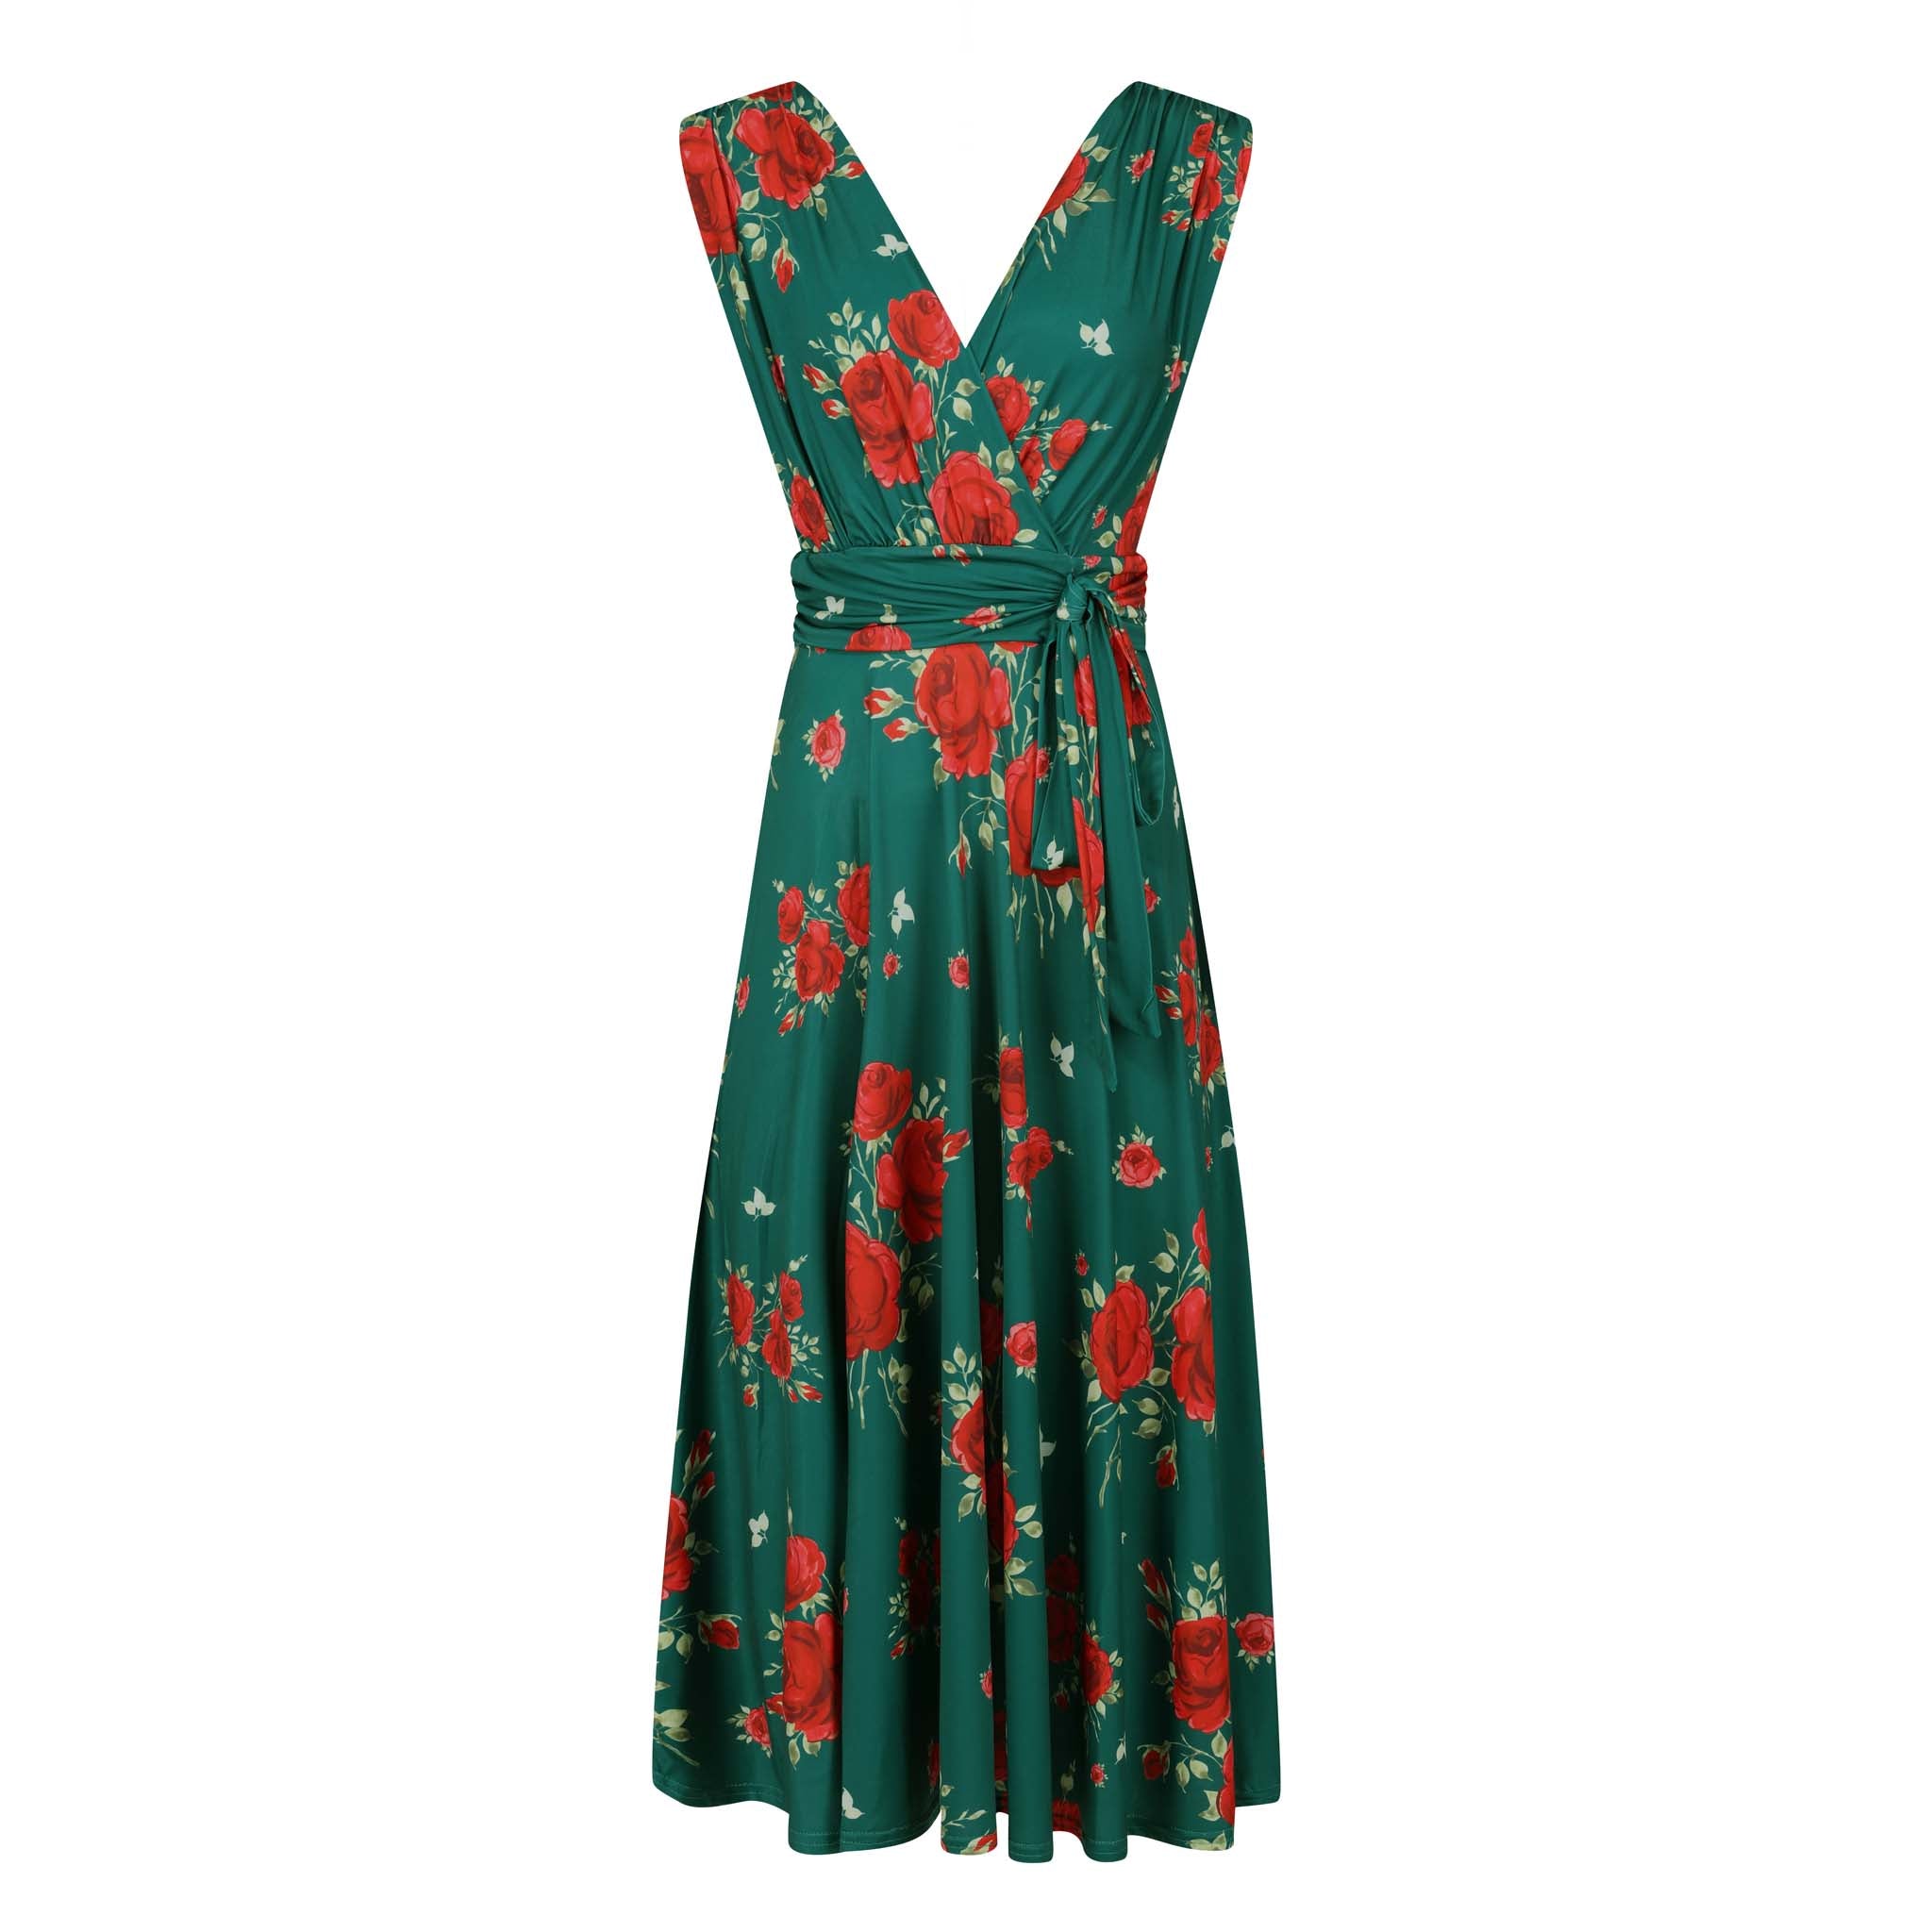 Green And Red Floral Print V Neck Crossover Top Empire Waist Swing Dress